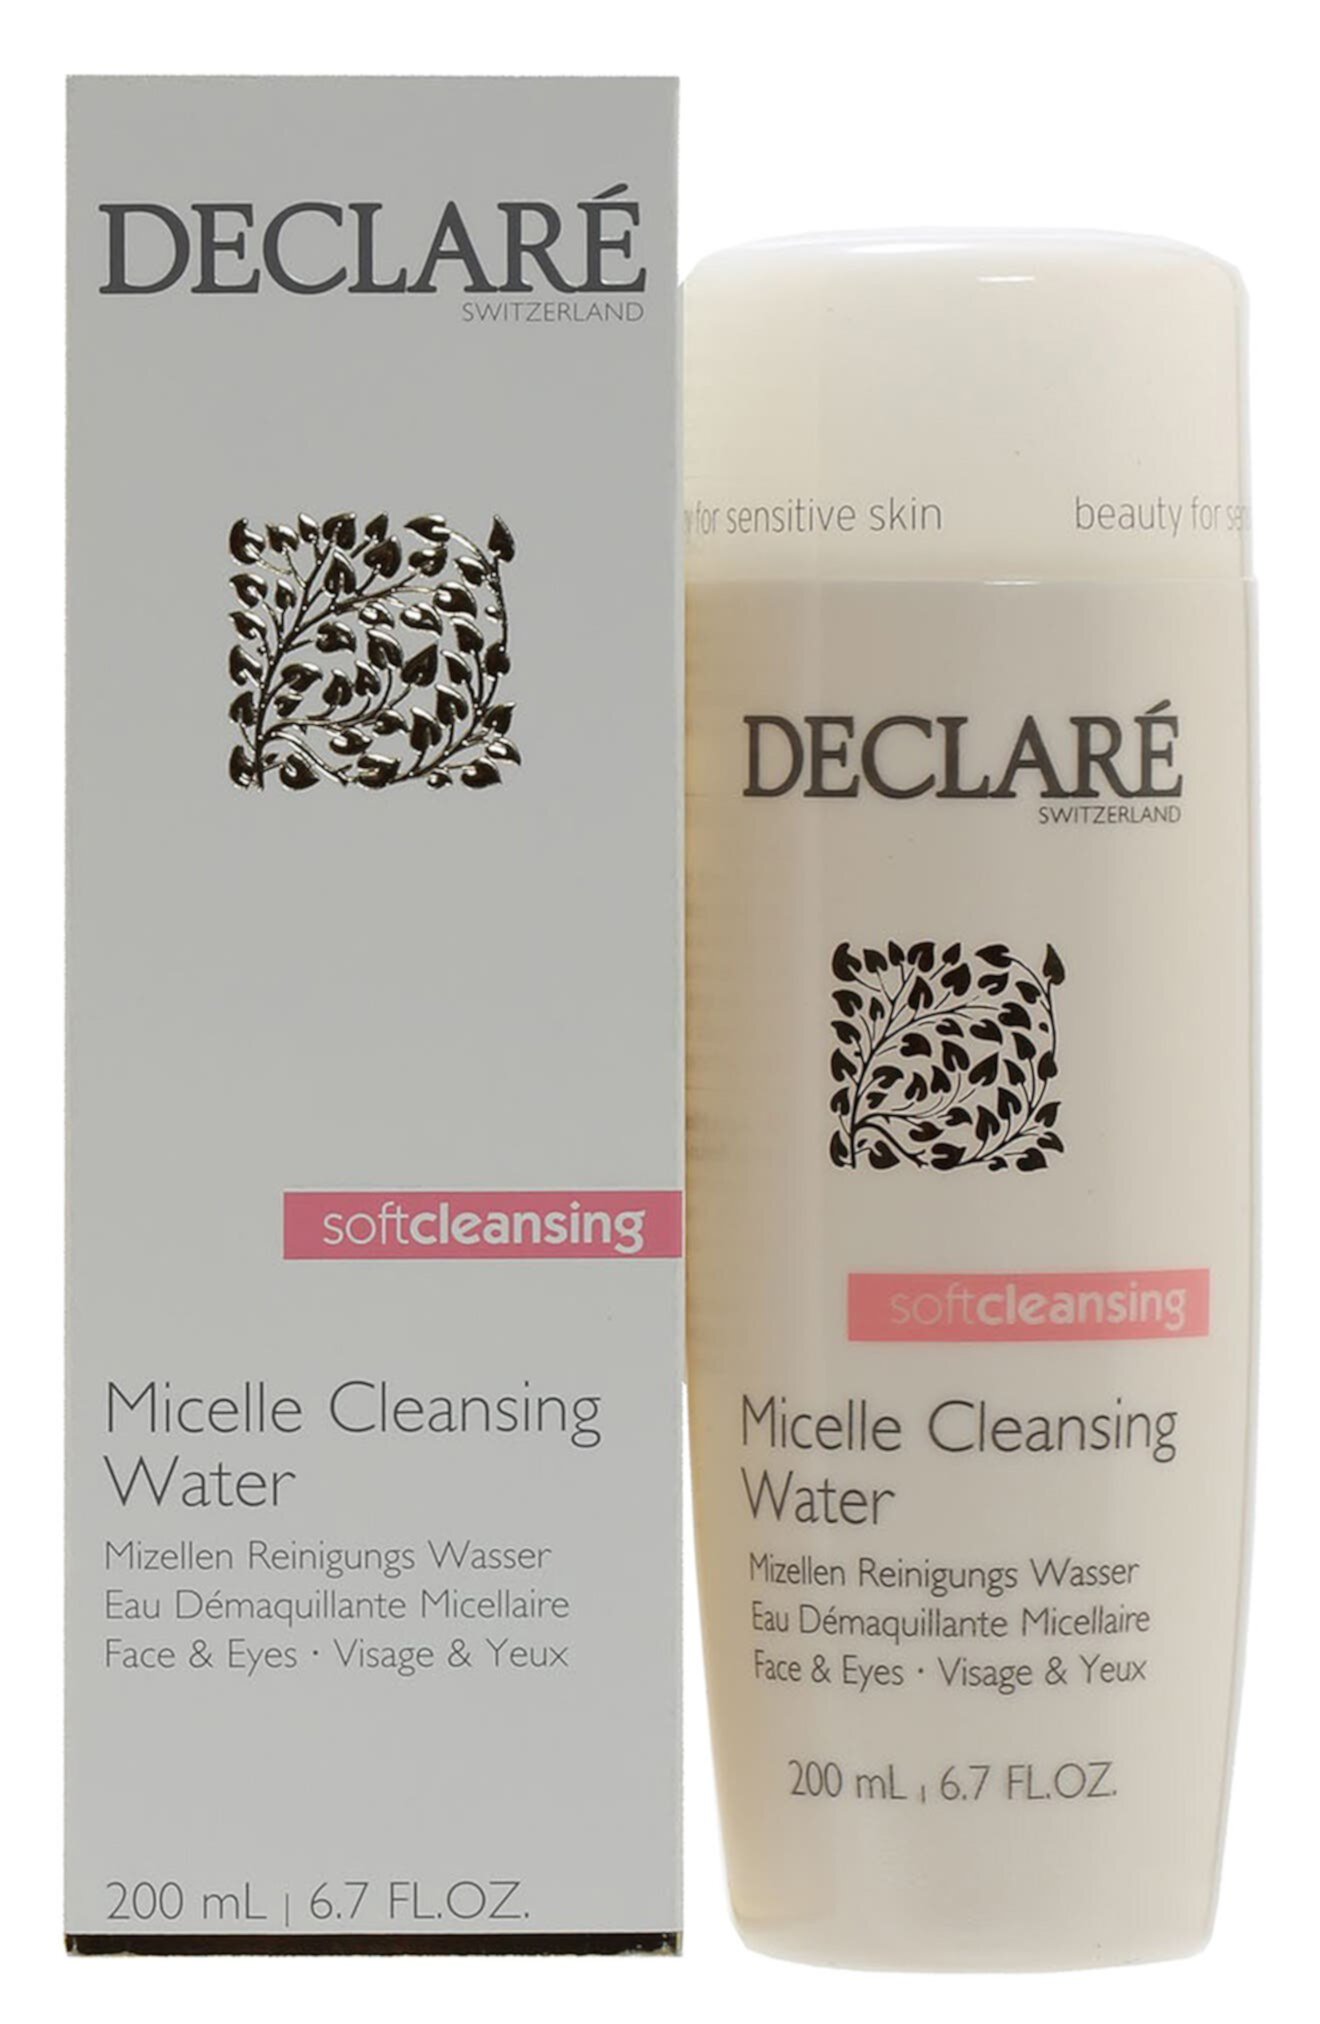 Micelle Cleansing Water DECLARE